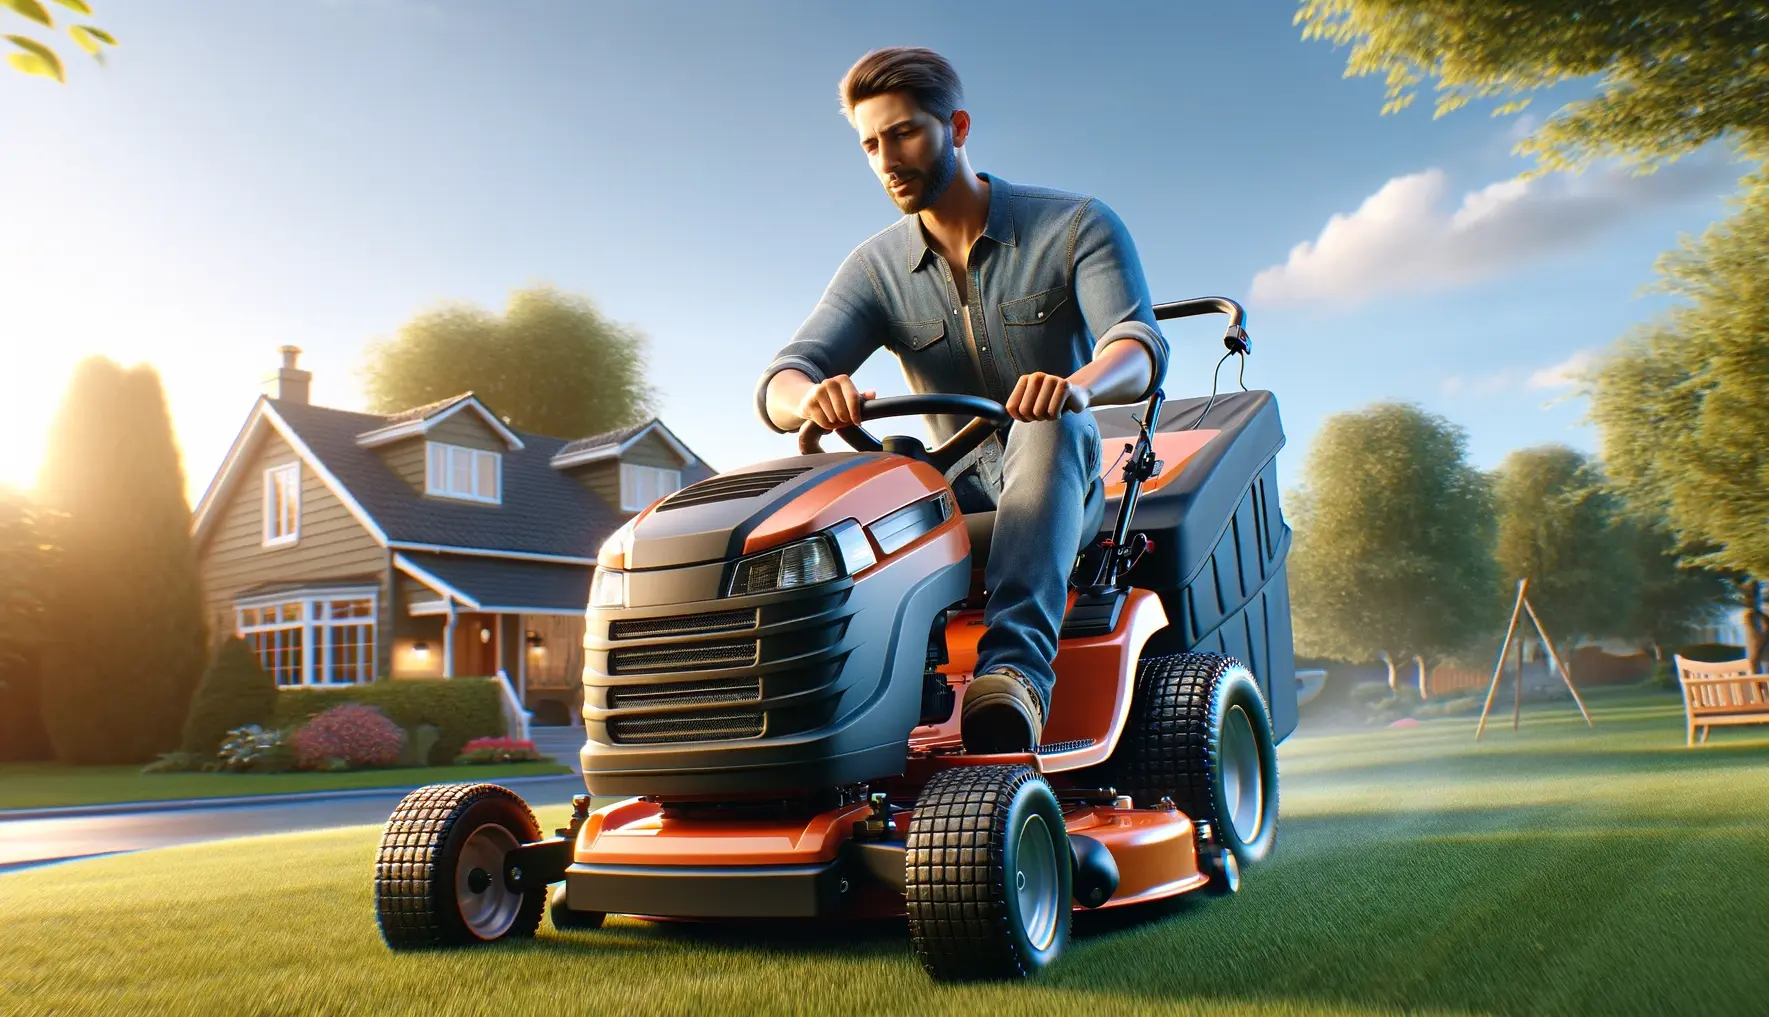 Get your lawn mower or riding mower tuned up or repaired.